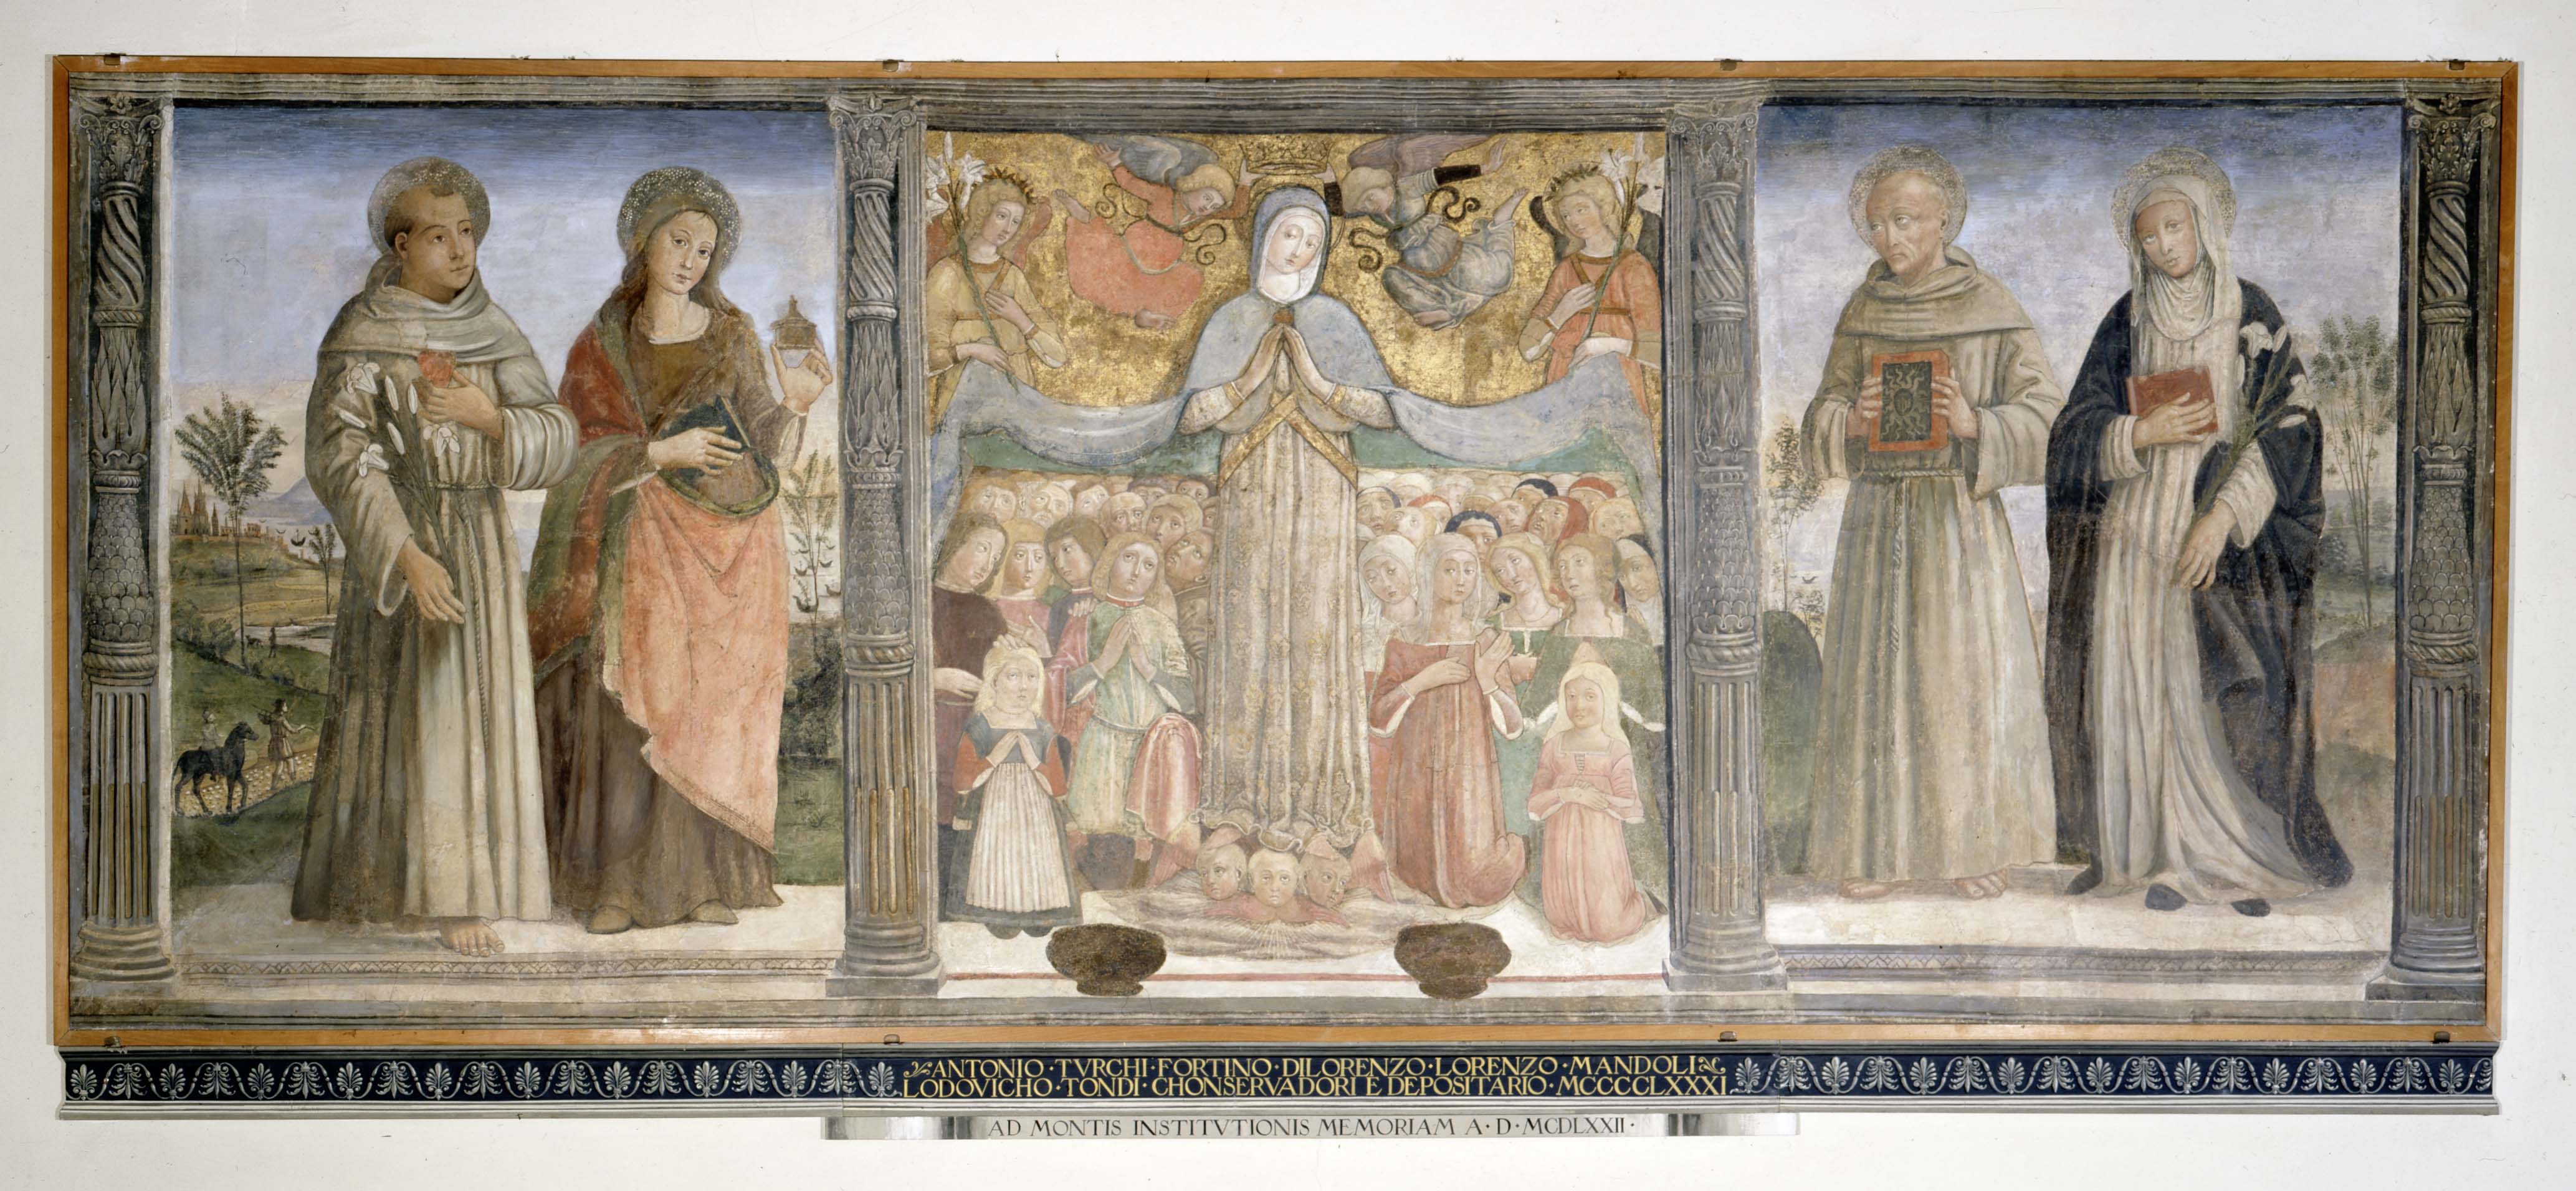 The image is of a large, panoramic fresco or painting divided into three main panels, framed by decorative columns on either side. The left panel shows two saintly figures with halos, one holding a flower and the other a book, set against a landscape backdrop with a figure leading a donkey. The central panel features a religious scene with a gathering of angels and saints around a central figure who appears to be the Virgin Mary, all under a golden, cloud-filled arc. The right panel mirrors the left with two haloed figures, one holding a book and the other gazing directly at the viewer. Beneath the central scene is a Latin inscription, suggesting a dedication or memorial purpose. The painting is rendered in a style that suggests it is from the Italian Renaissance, with attention to detail and a harmonious color palette, conveying a sense of serenity and sacredness.